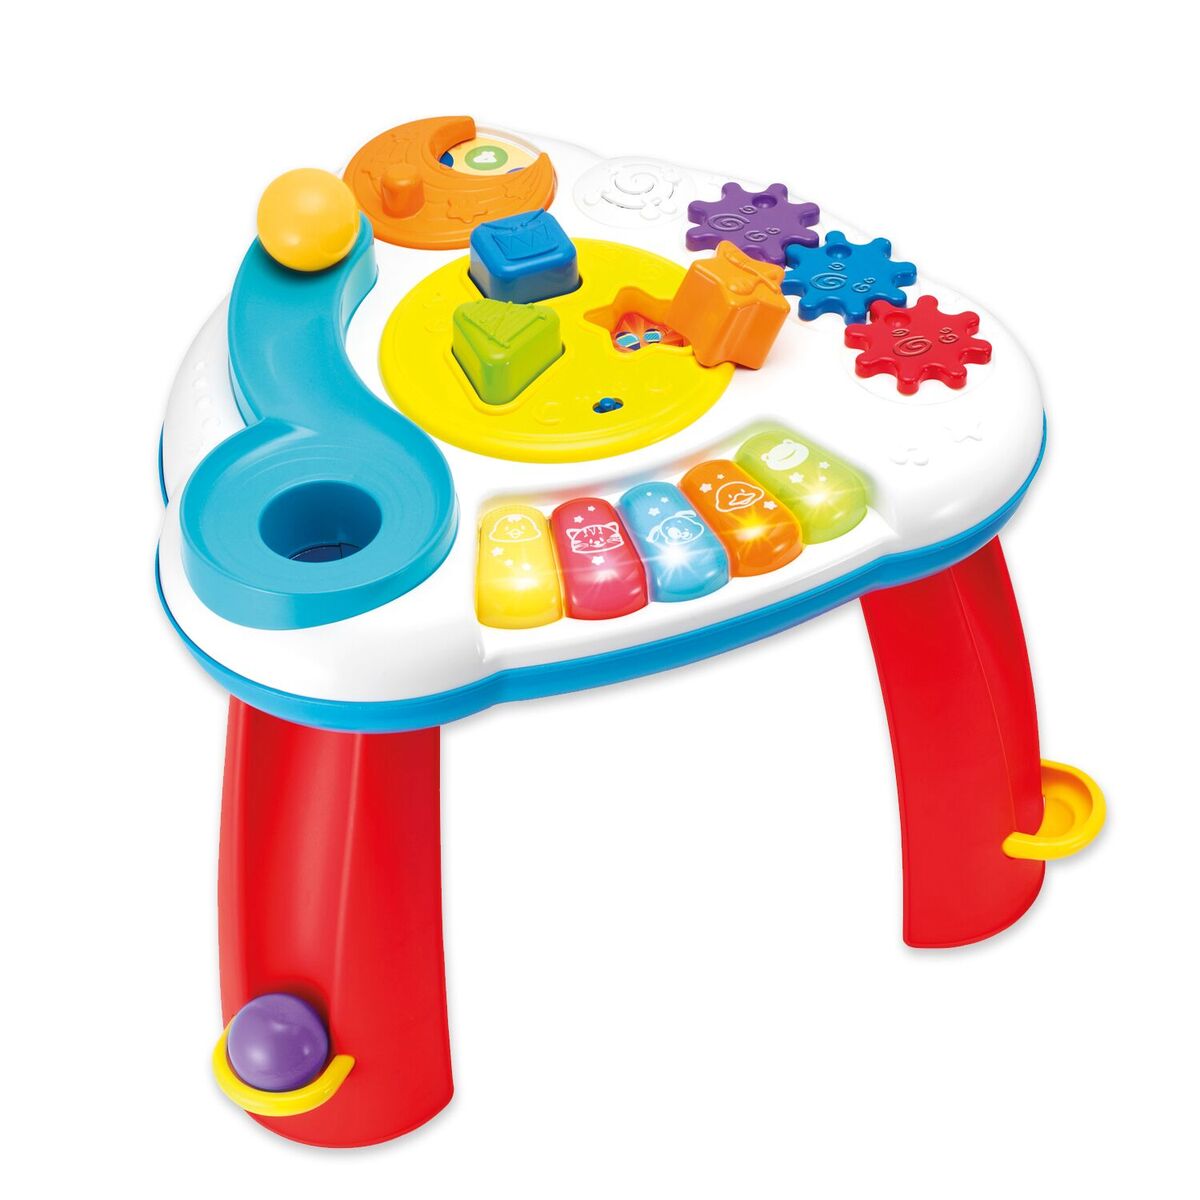 Picture of Winfun 0812 Balls N Shapes Musical Table